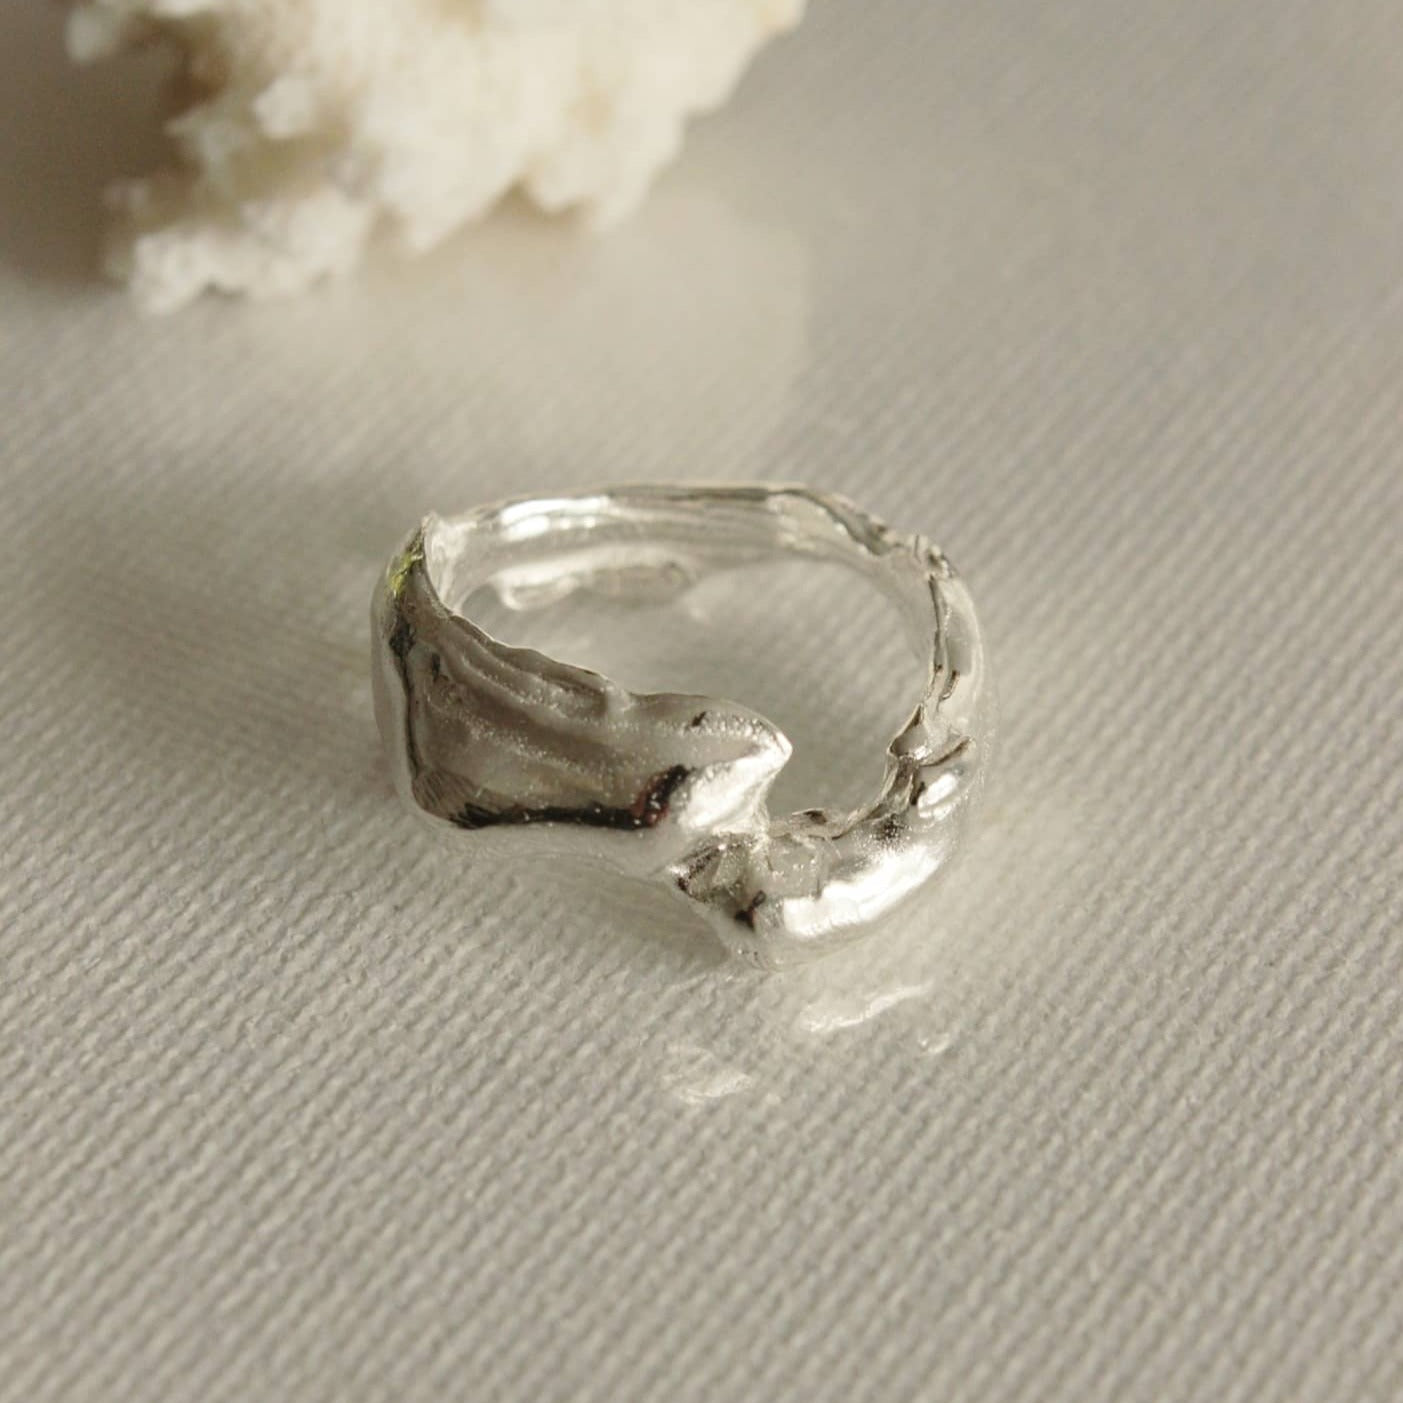 The molten ring appears to have been moulded from the ocean itself. Inspired by molten lava spilling into cool water to create organic and unique sculptures. Enjoy this treasure wrapped around your finger everyday and feel a little closer to the ocean.